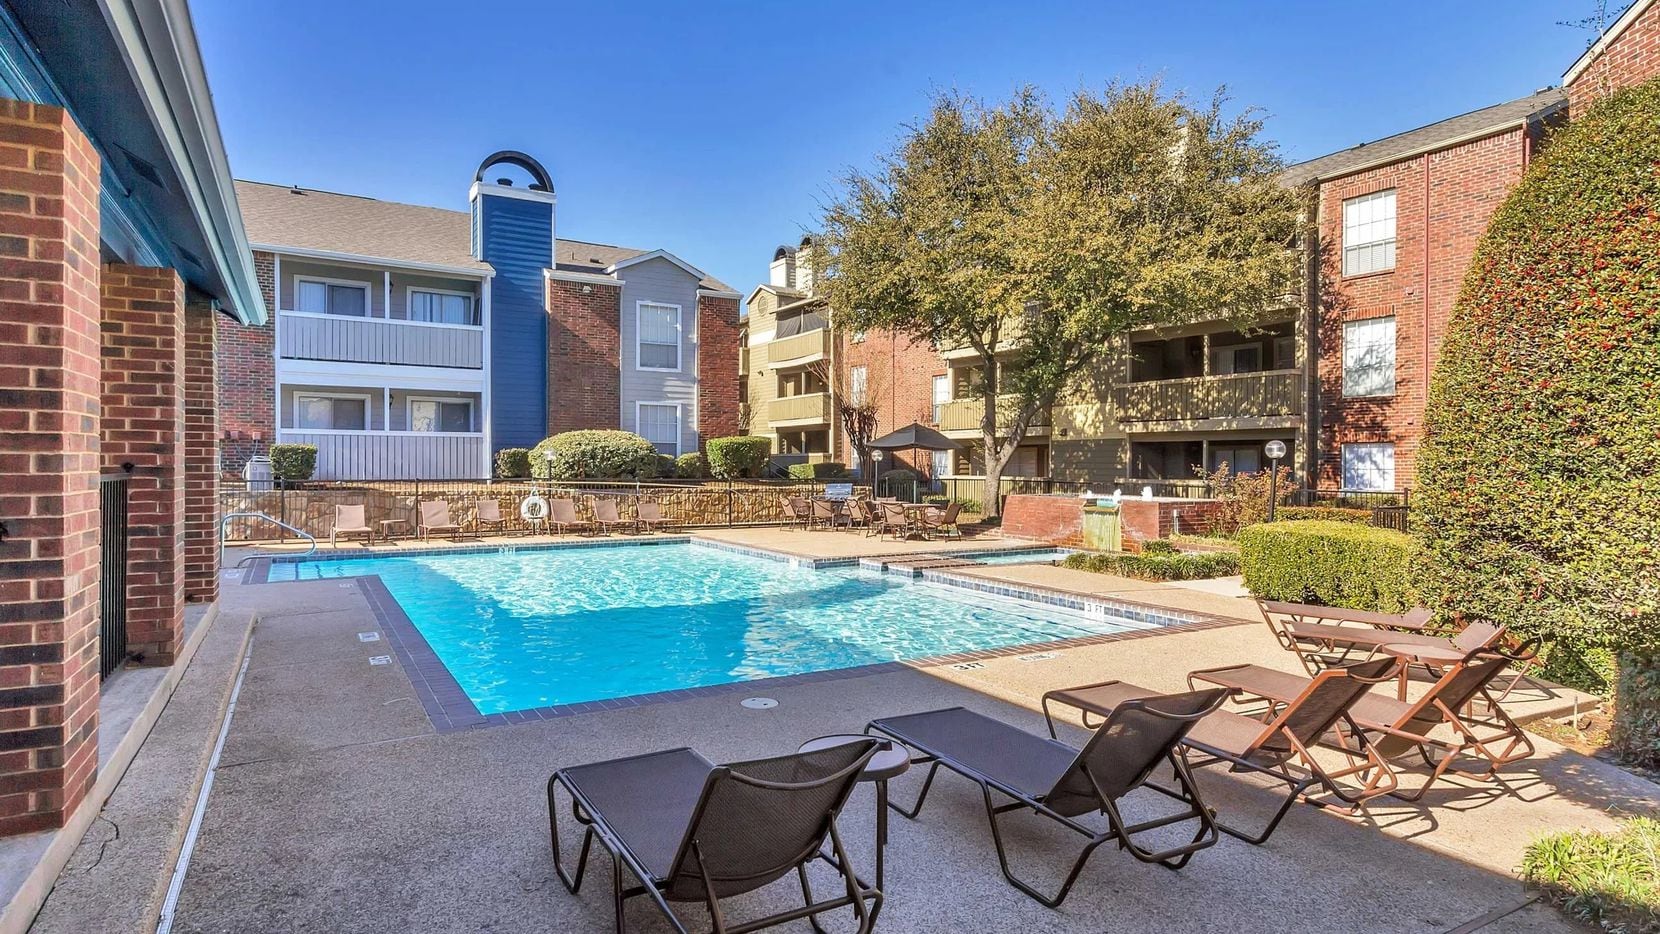 The Woodstone apartments in eastern Fort Worth were one of two properties purchased by...